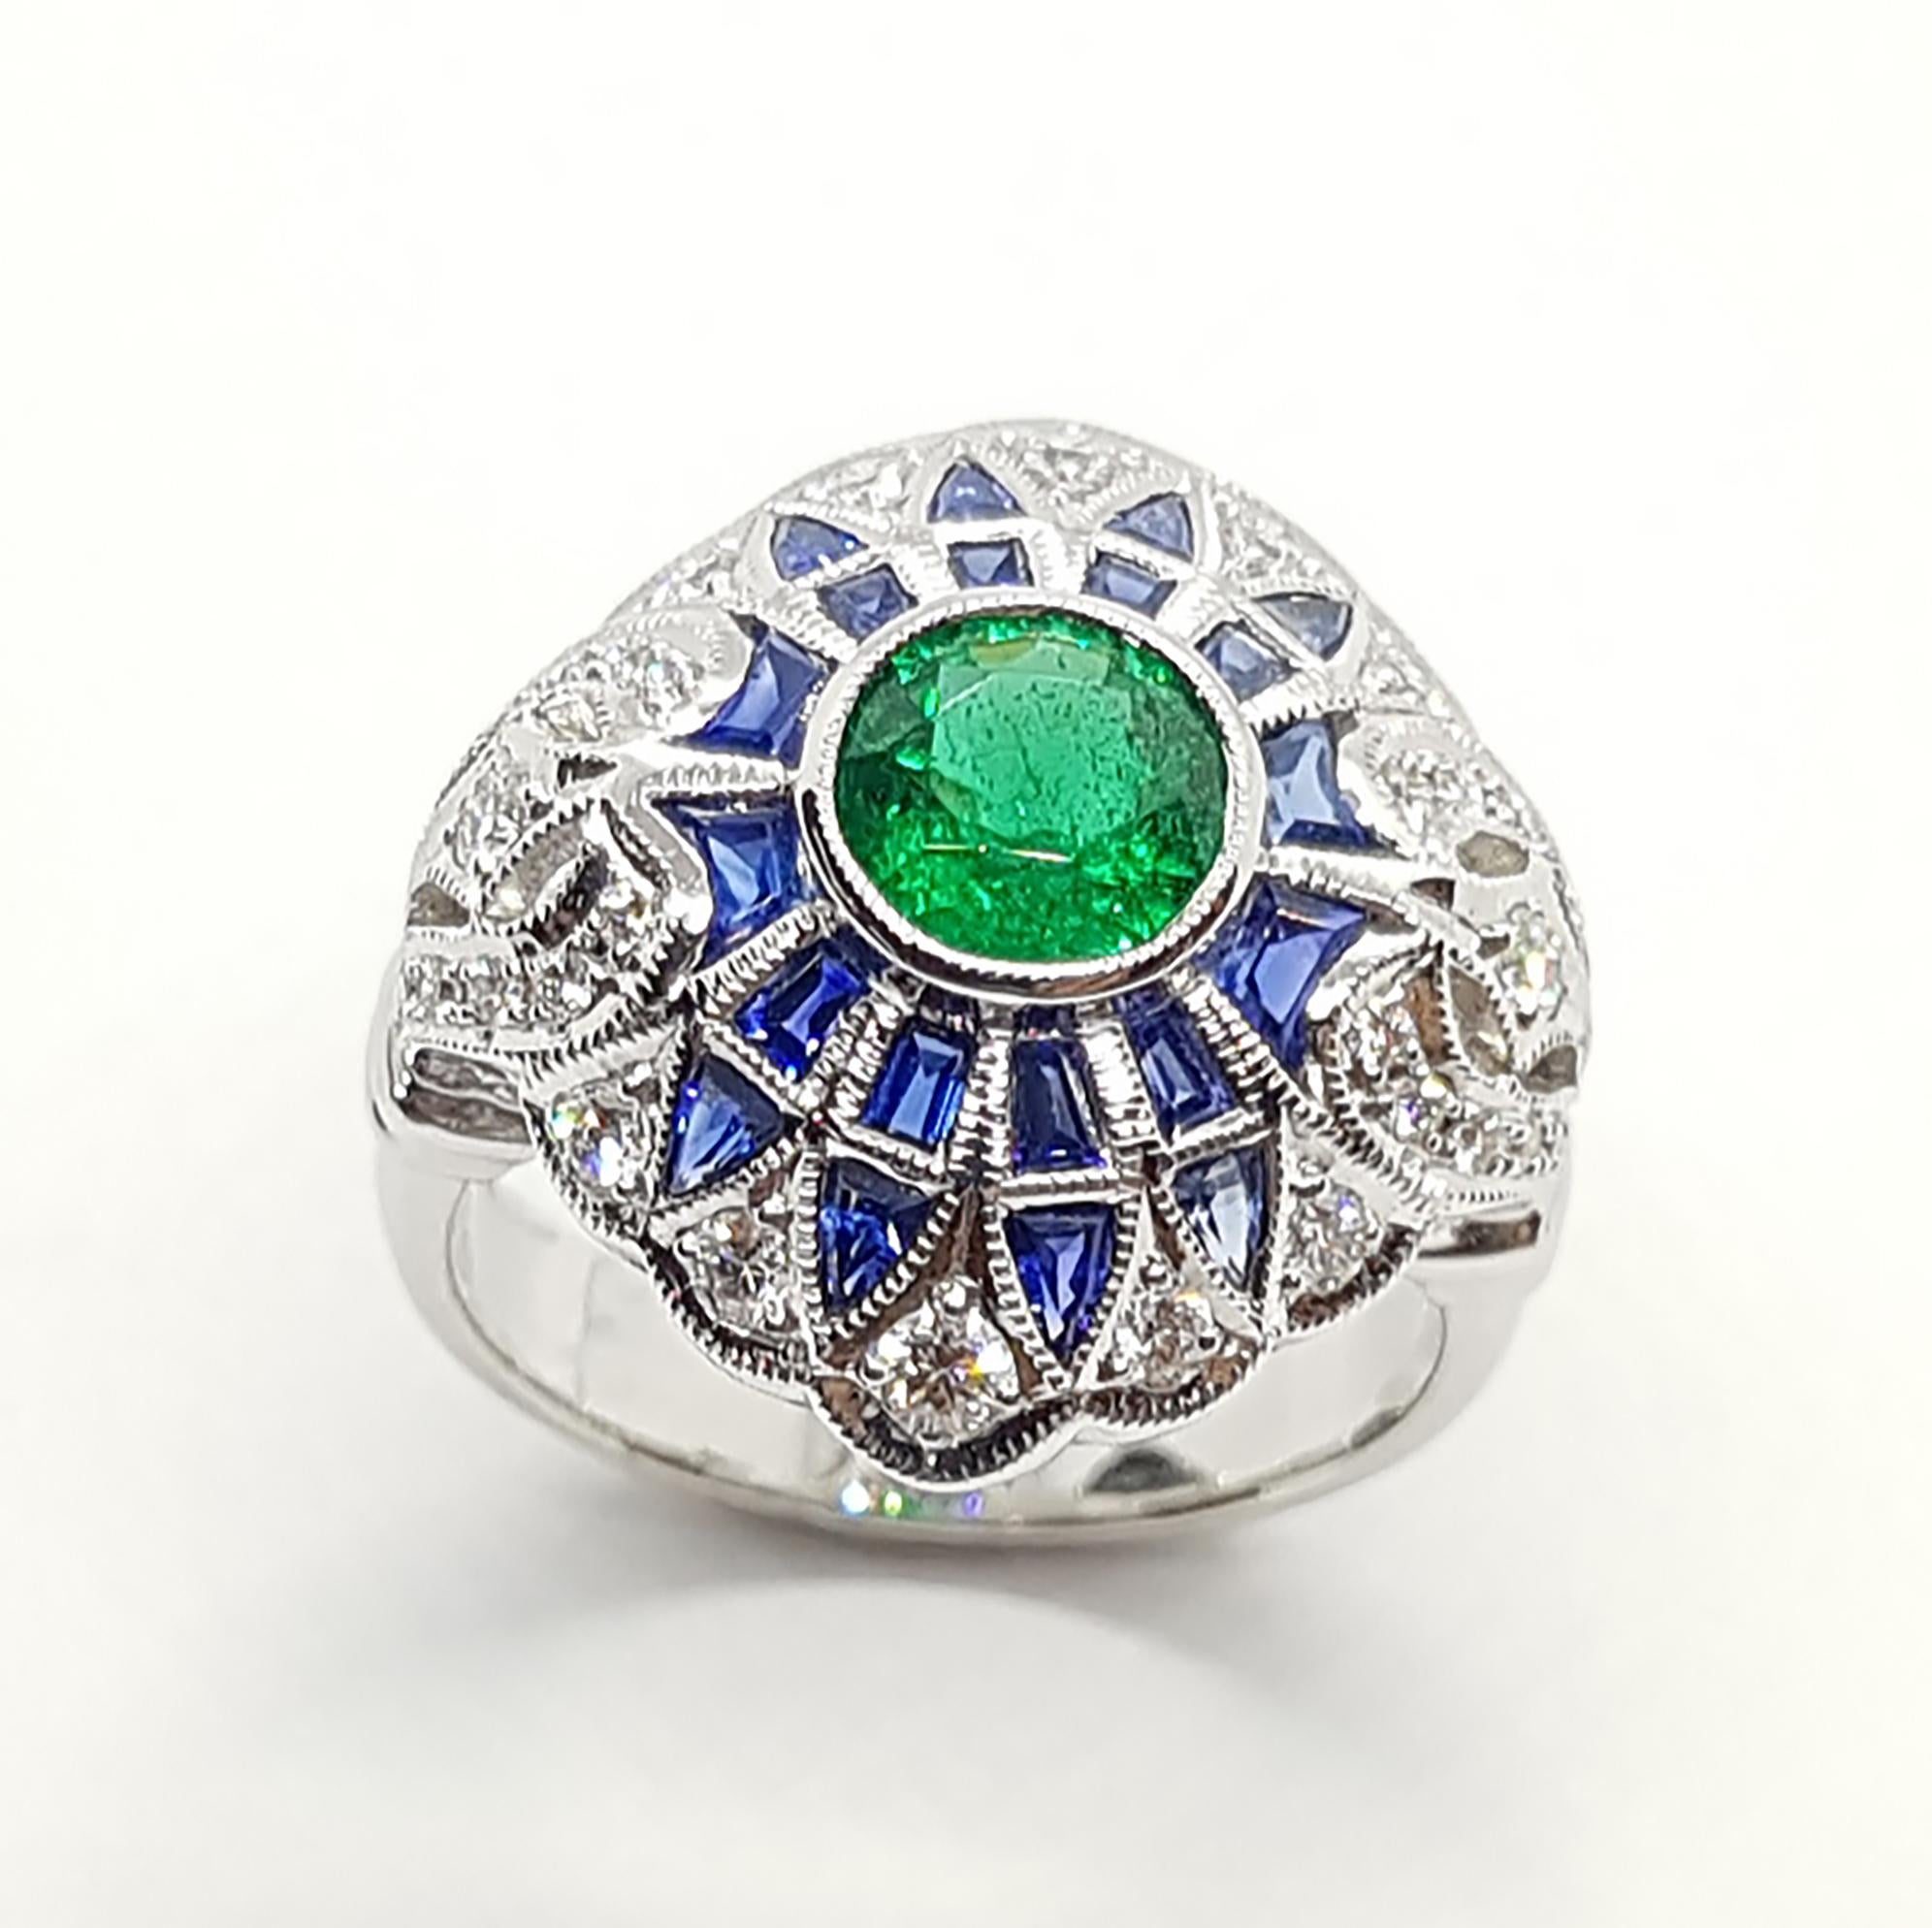 Emerald 0.87 carats with Blue sapphire 2.10 carats and Diamond 0.42 carat Ring set in 18 Karat White Gold Settings

Width:  2.0 cm 
Length: 2.0 cm
Ring Size: 53
Total Weight: 9.57 grams

